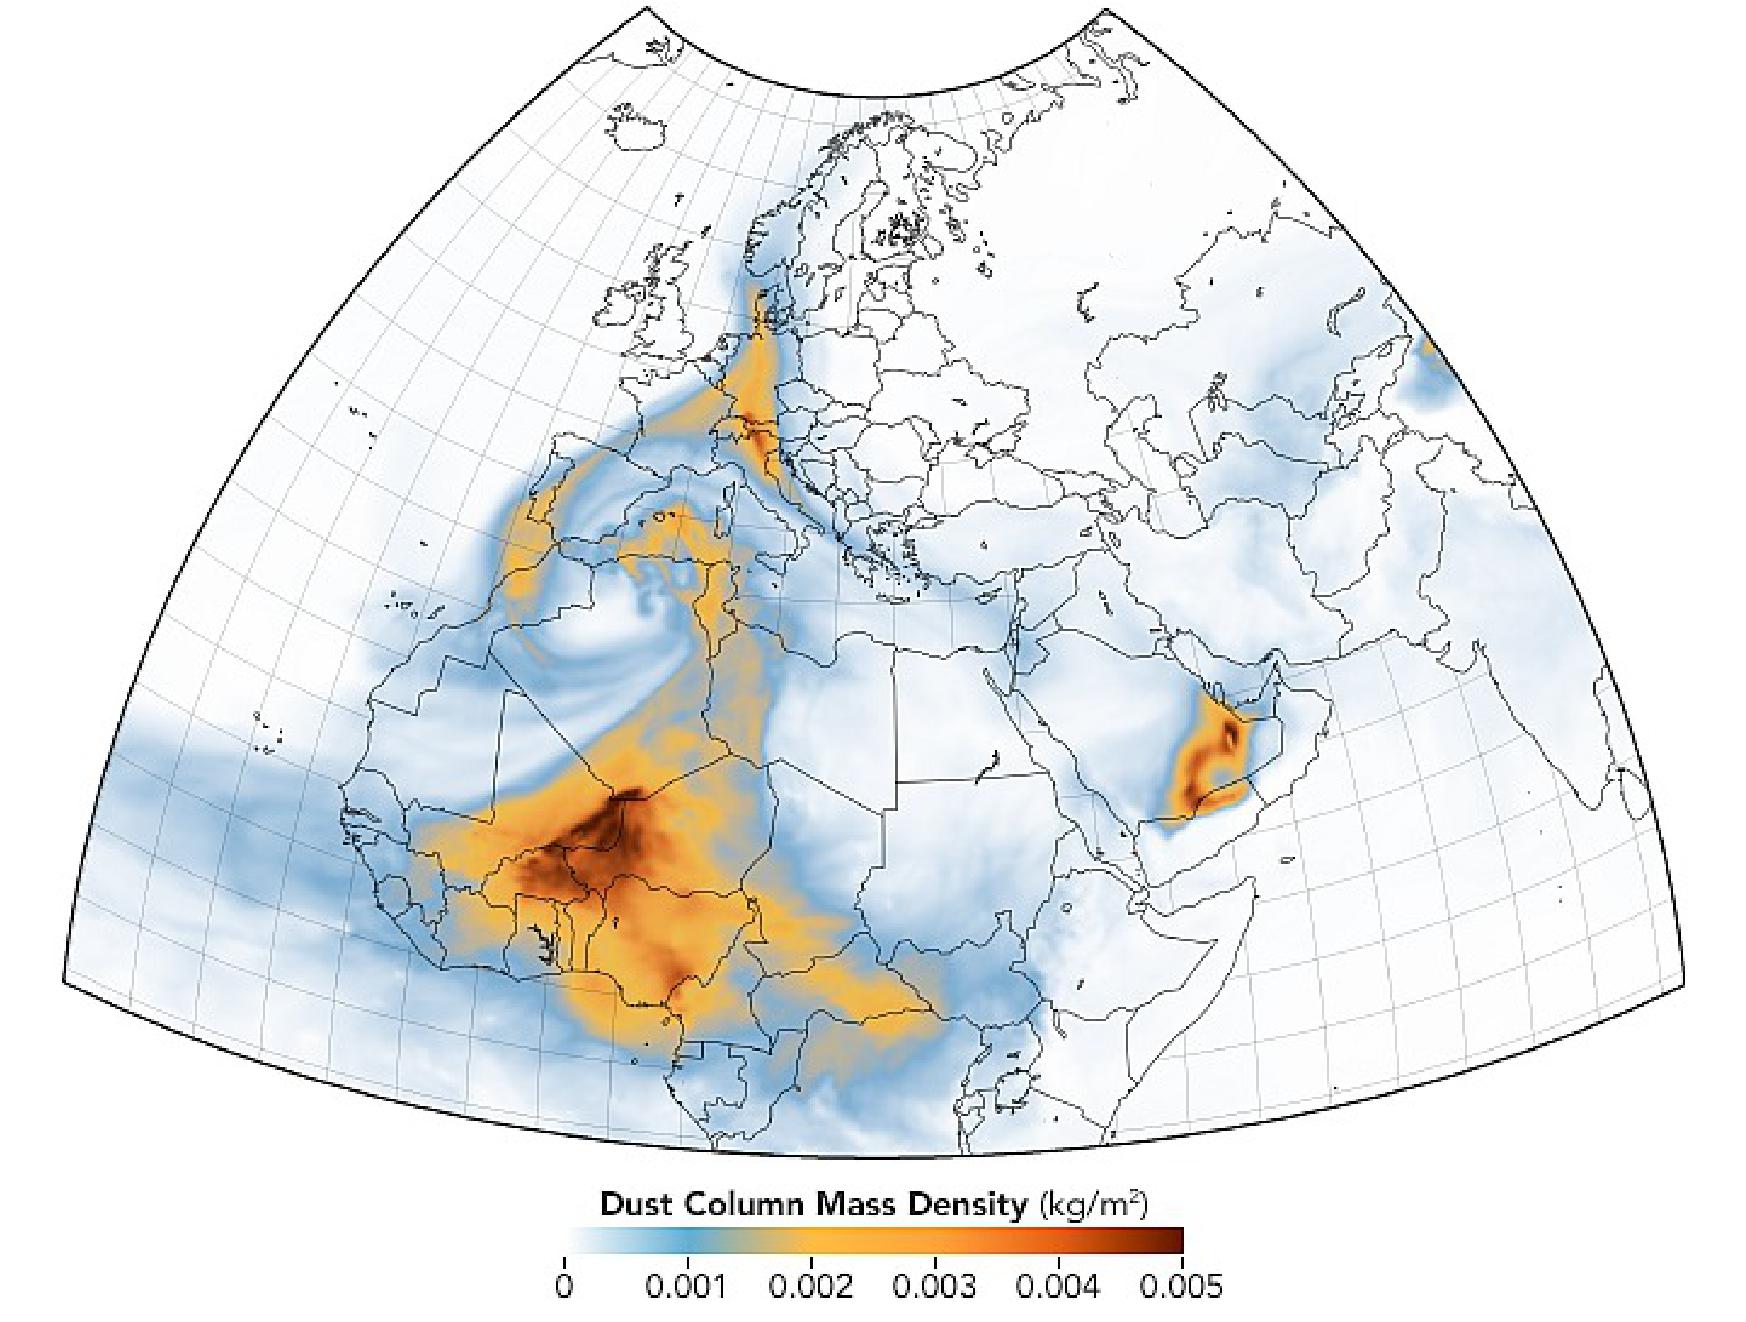 Figure 25: Long-lasting, icy cirrus clouds filled with Saharan dust covered many parts of the continent in March. The map shows a model of the dust movement on March 17 based on the Goddard Earth Observing System Model, Version 5 (GEOS-5), image credit: NASA Earth Observatory (image credit: NASA Earth Observatory)